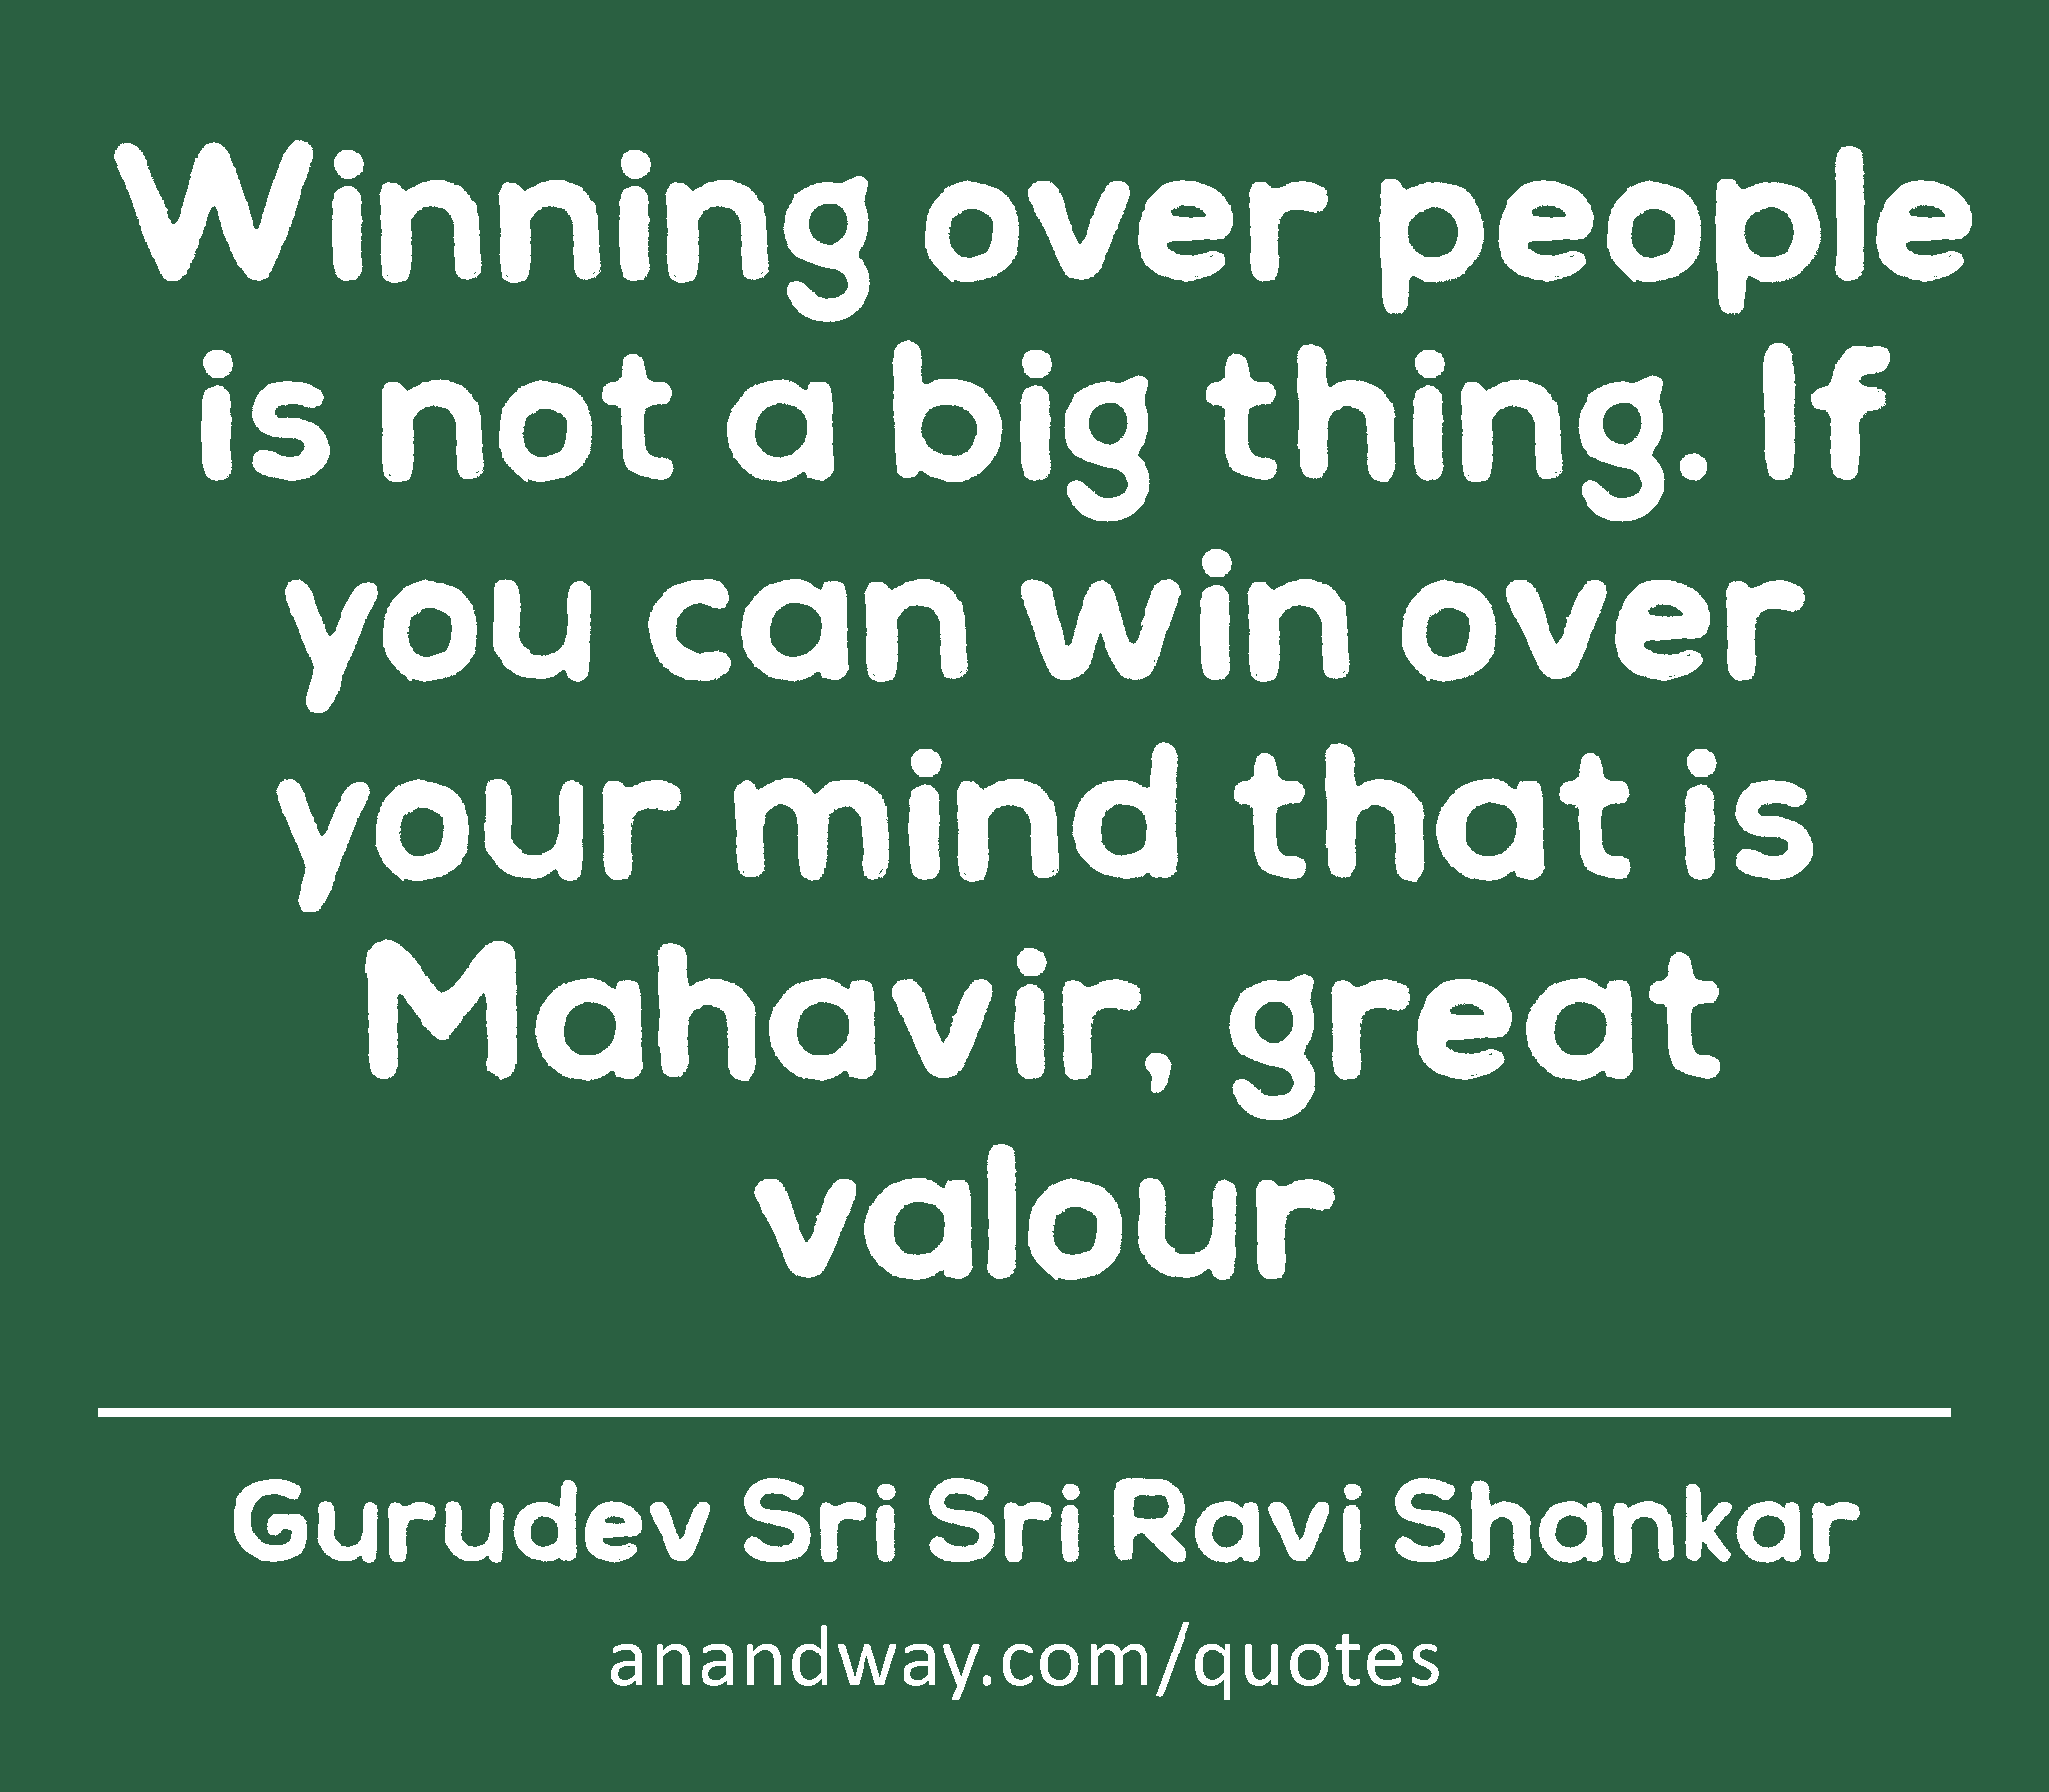 Winning over people is not a big thing. If you can win over your mind that is Mahavir, great valour
 -Gurudev Sri Sri Ravi Shankar